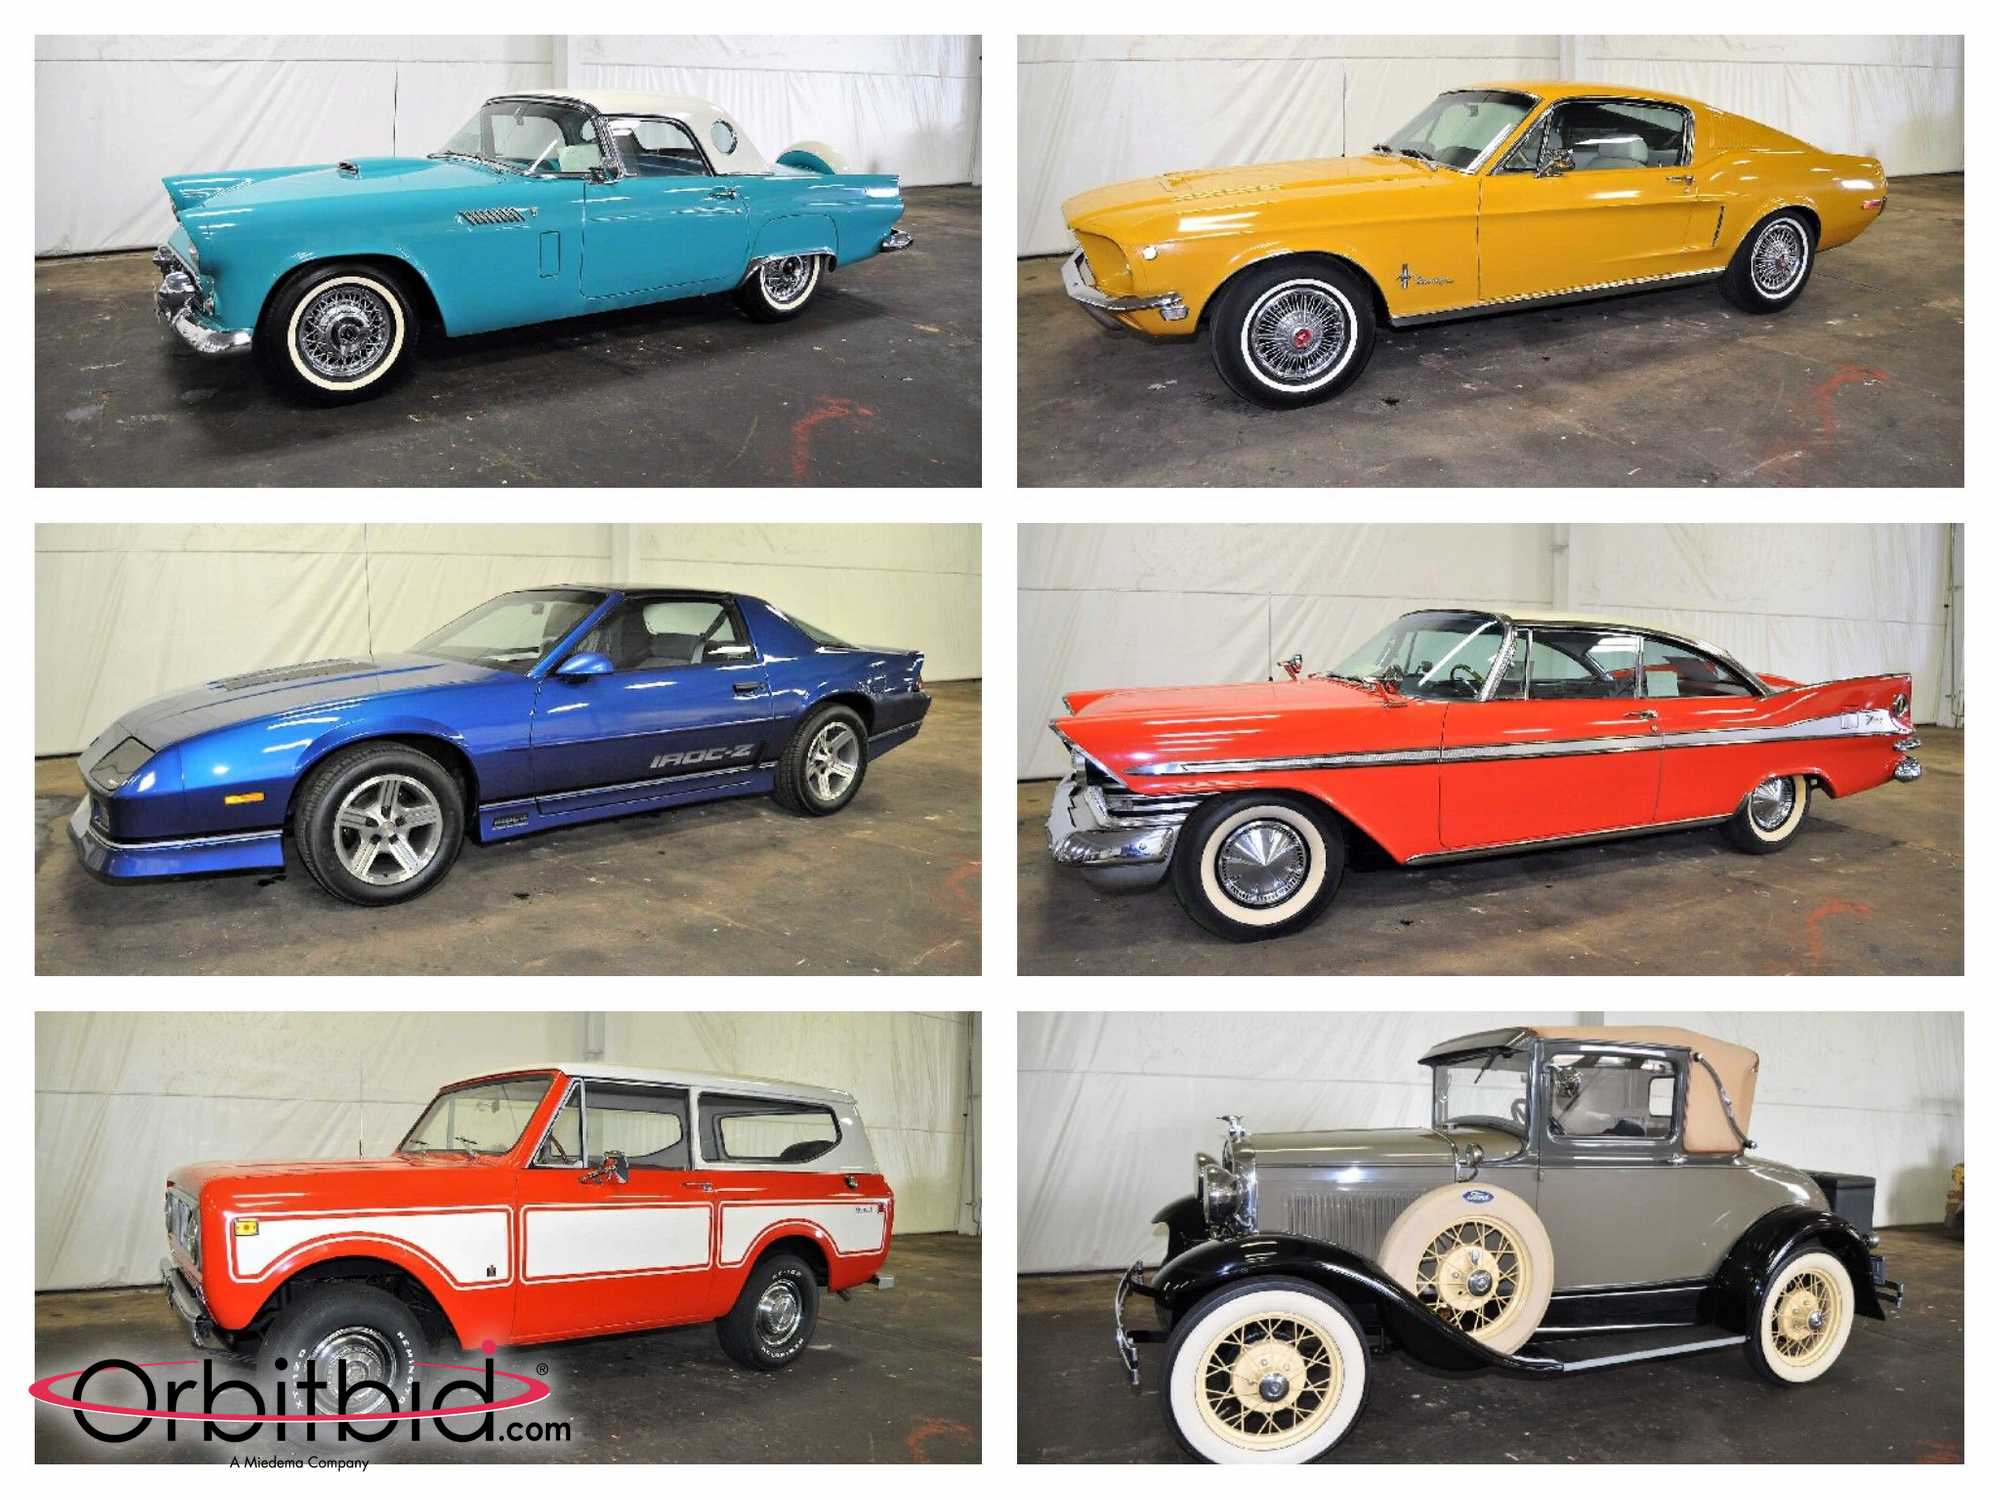 Sutter Family’s Incredible Car Collection is now at Auction.